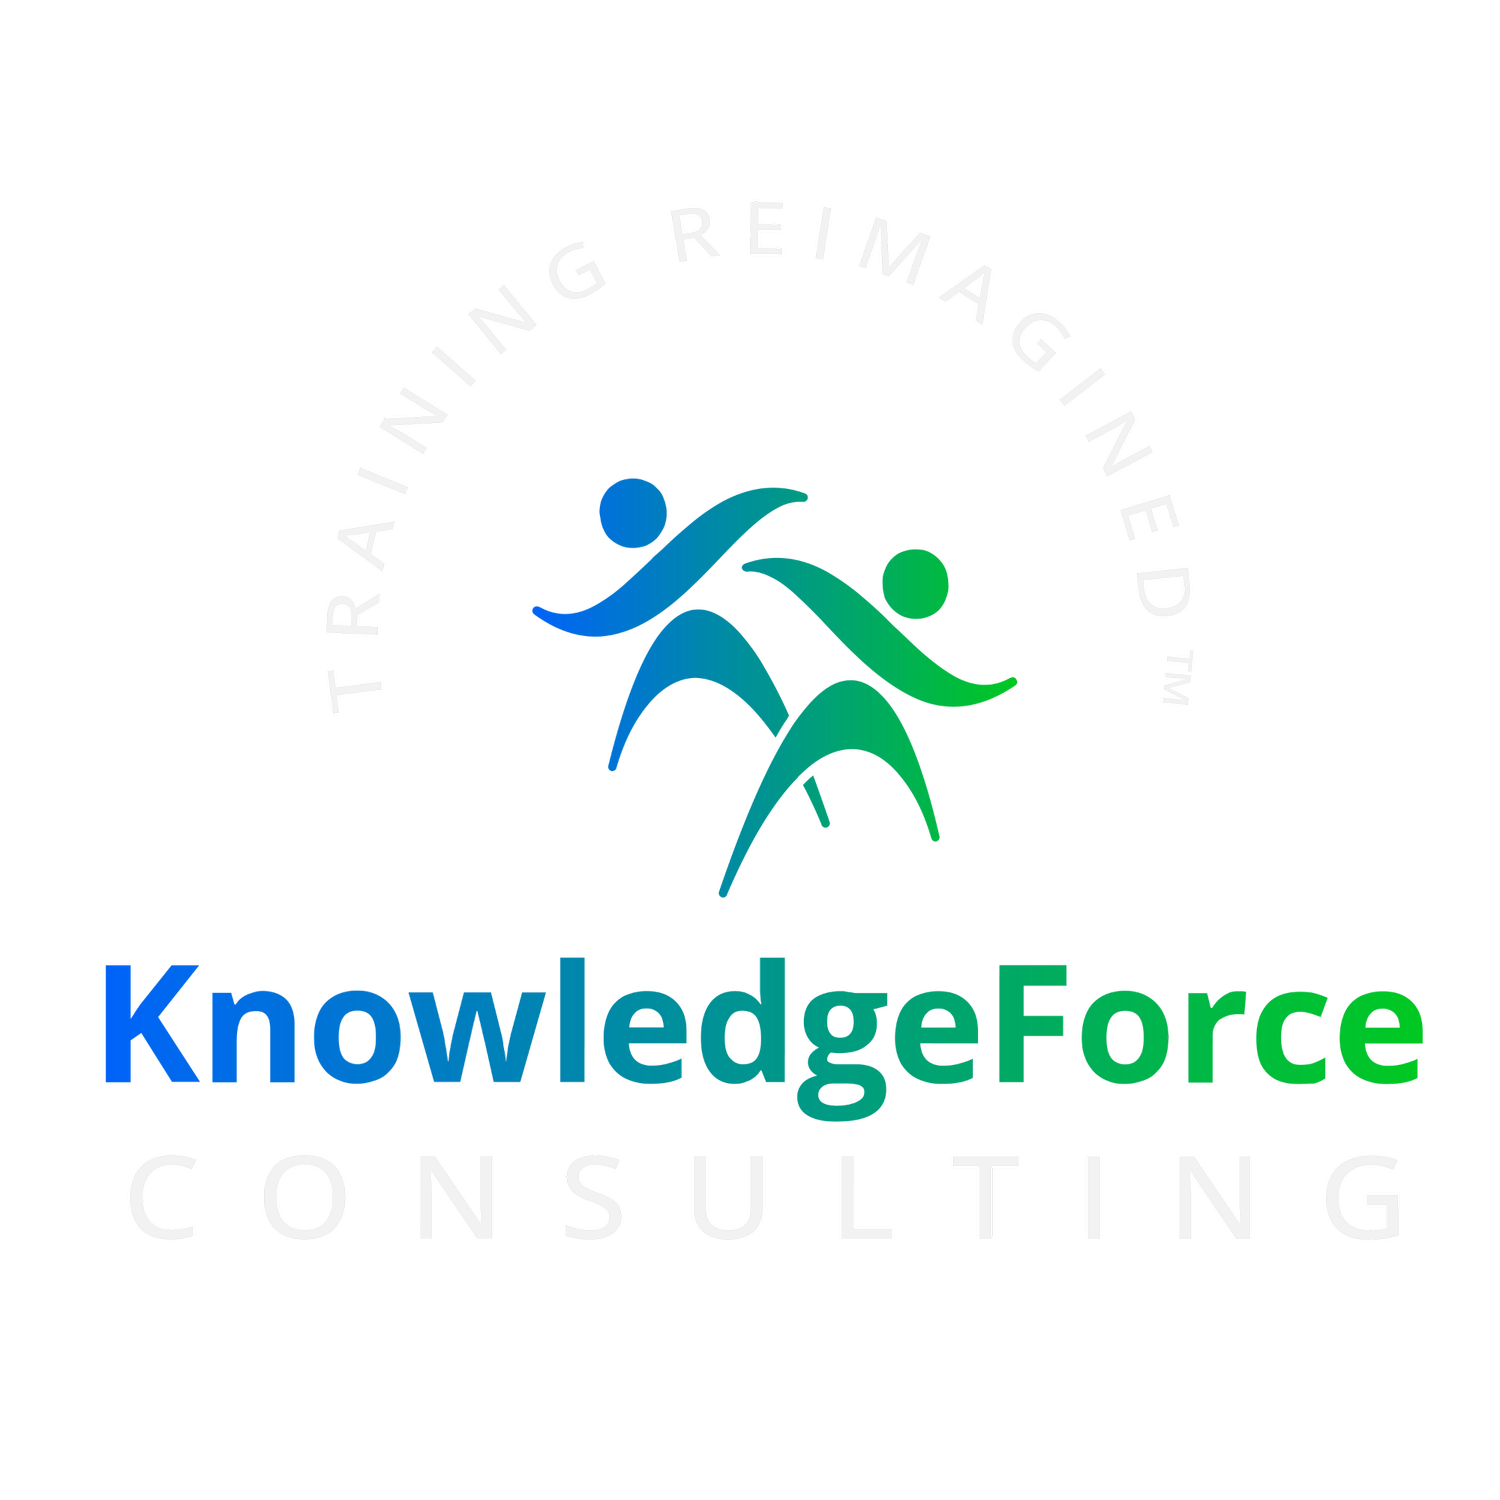 KnowledgeForce Consulting